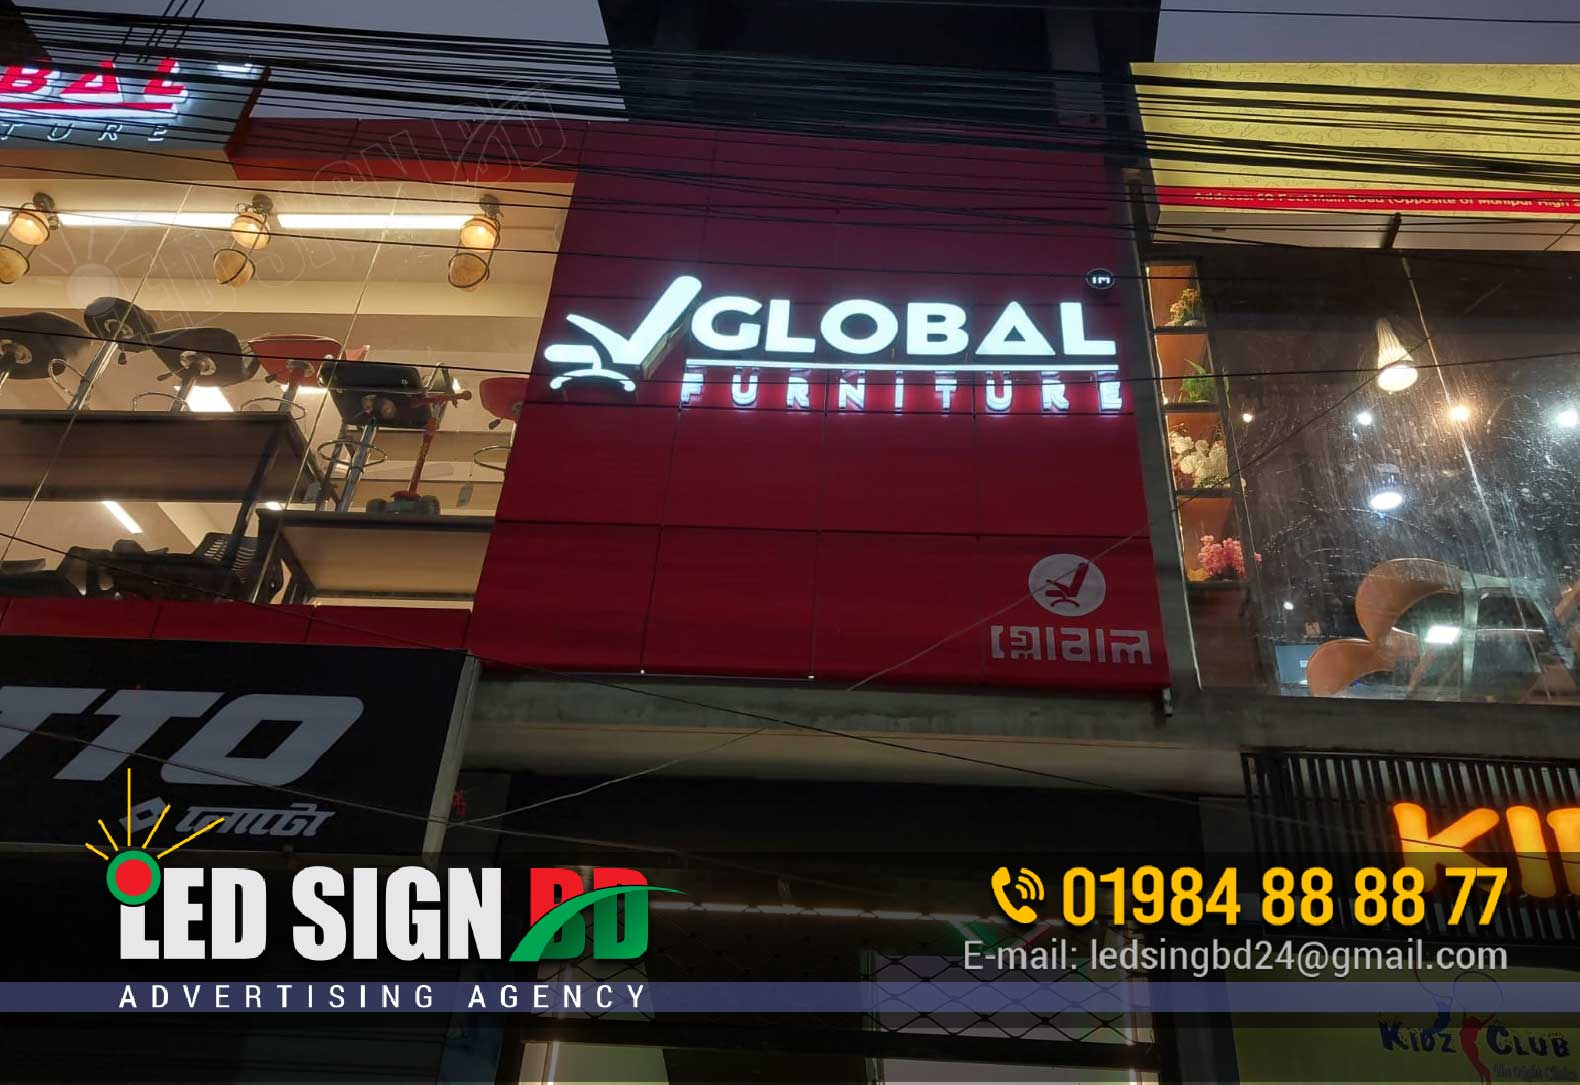 Acrylic Letter Signage in Dhaka Bangladesh, Logo Signs bd, LED Sign bd LED Sign Board Price in Bangladesh Neon Sign bd Neon Sign Board neon rgb led strip rgb light in bd signboard bd board design. A great Neon sign is an amazing home accessory and also ideal for business purposes. Do you want to create your own glow decoration that could enhance your own place or bring your party to the next level? Now customize your dream neon! It can be a lighting tool to light up your place, and a lovely decor for your salon, coffee shop. Talk to us for more neon decoration ideas!. Acrylic Letter LED Sign 3D Sign Letter Arrow Sign Board & Glow Arrow Sign with Acrylic Sign Acp Off Cutting Sign Branding for Outdoor Led Sign Board in Bangladesh. Best Acrylic & SS Letter Sign - Mirror SS & Glow Signage Glow Yellow Color Acrylic Signage & Yellow Led Light Led Sign Acrylic Letter Price in Bangladesh-2023 A-Z Alphabet Letter Acrylic Mirror Wall Art Sticker Decal Glow Sign Board Best Price in Bangladesh &Glow Acrylic Sign 3d Acrylic Letter Sign board SS Sign Board SS Top Letter Acrylic Top Letter SS Metal Letter acrylic letter design acrylic letter price acrylic letter making machine acrylic letter sign board acrylic letter cutting near me acrylic letter signage led acrylic letter price acrylic letter templates Acrylic Letter with Led Sign Board Neon Sign Board Acrylic Top Letter SS Sign Board Name Plate Board LED Display Board ACP Board Branding Acrylic Top Letter SS Top Letter Aluminum Profile Box Backlit Sign Board Billboards Box LED Light Shop Sign Board Lighting Sign Board Tube Light Neon Signage Neon Lighting Sign Board Box Type MS Metal Letter Indoor Sign Outdoor Signage Advertising Branding Service All over Bangladesh. Our Service All Kinds of Digital Print Pana, PVC, Shop Sign, Name Plate, Lighting Sign Board, LED Sign, Neon Sign, Acrylic Sign, Moving Display, Fair Stall & Event Management Ad Etc. Hope You’re Interested!